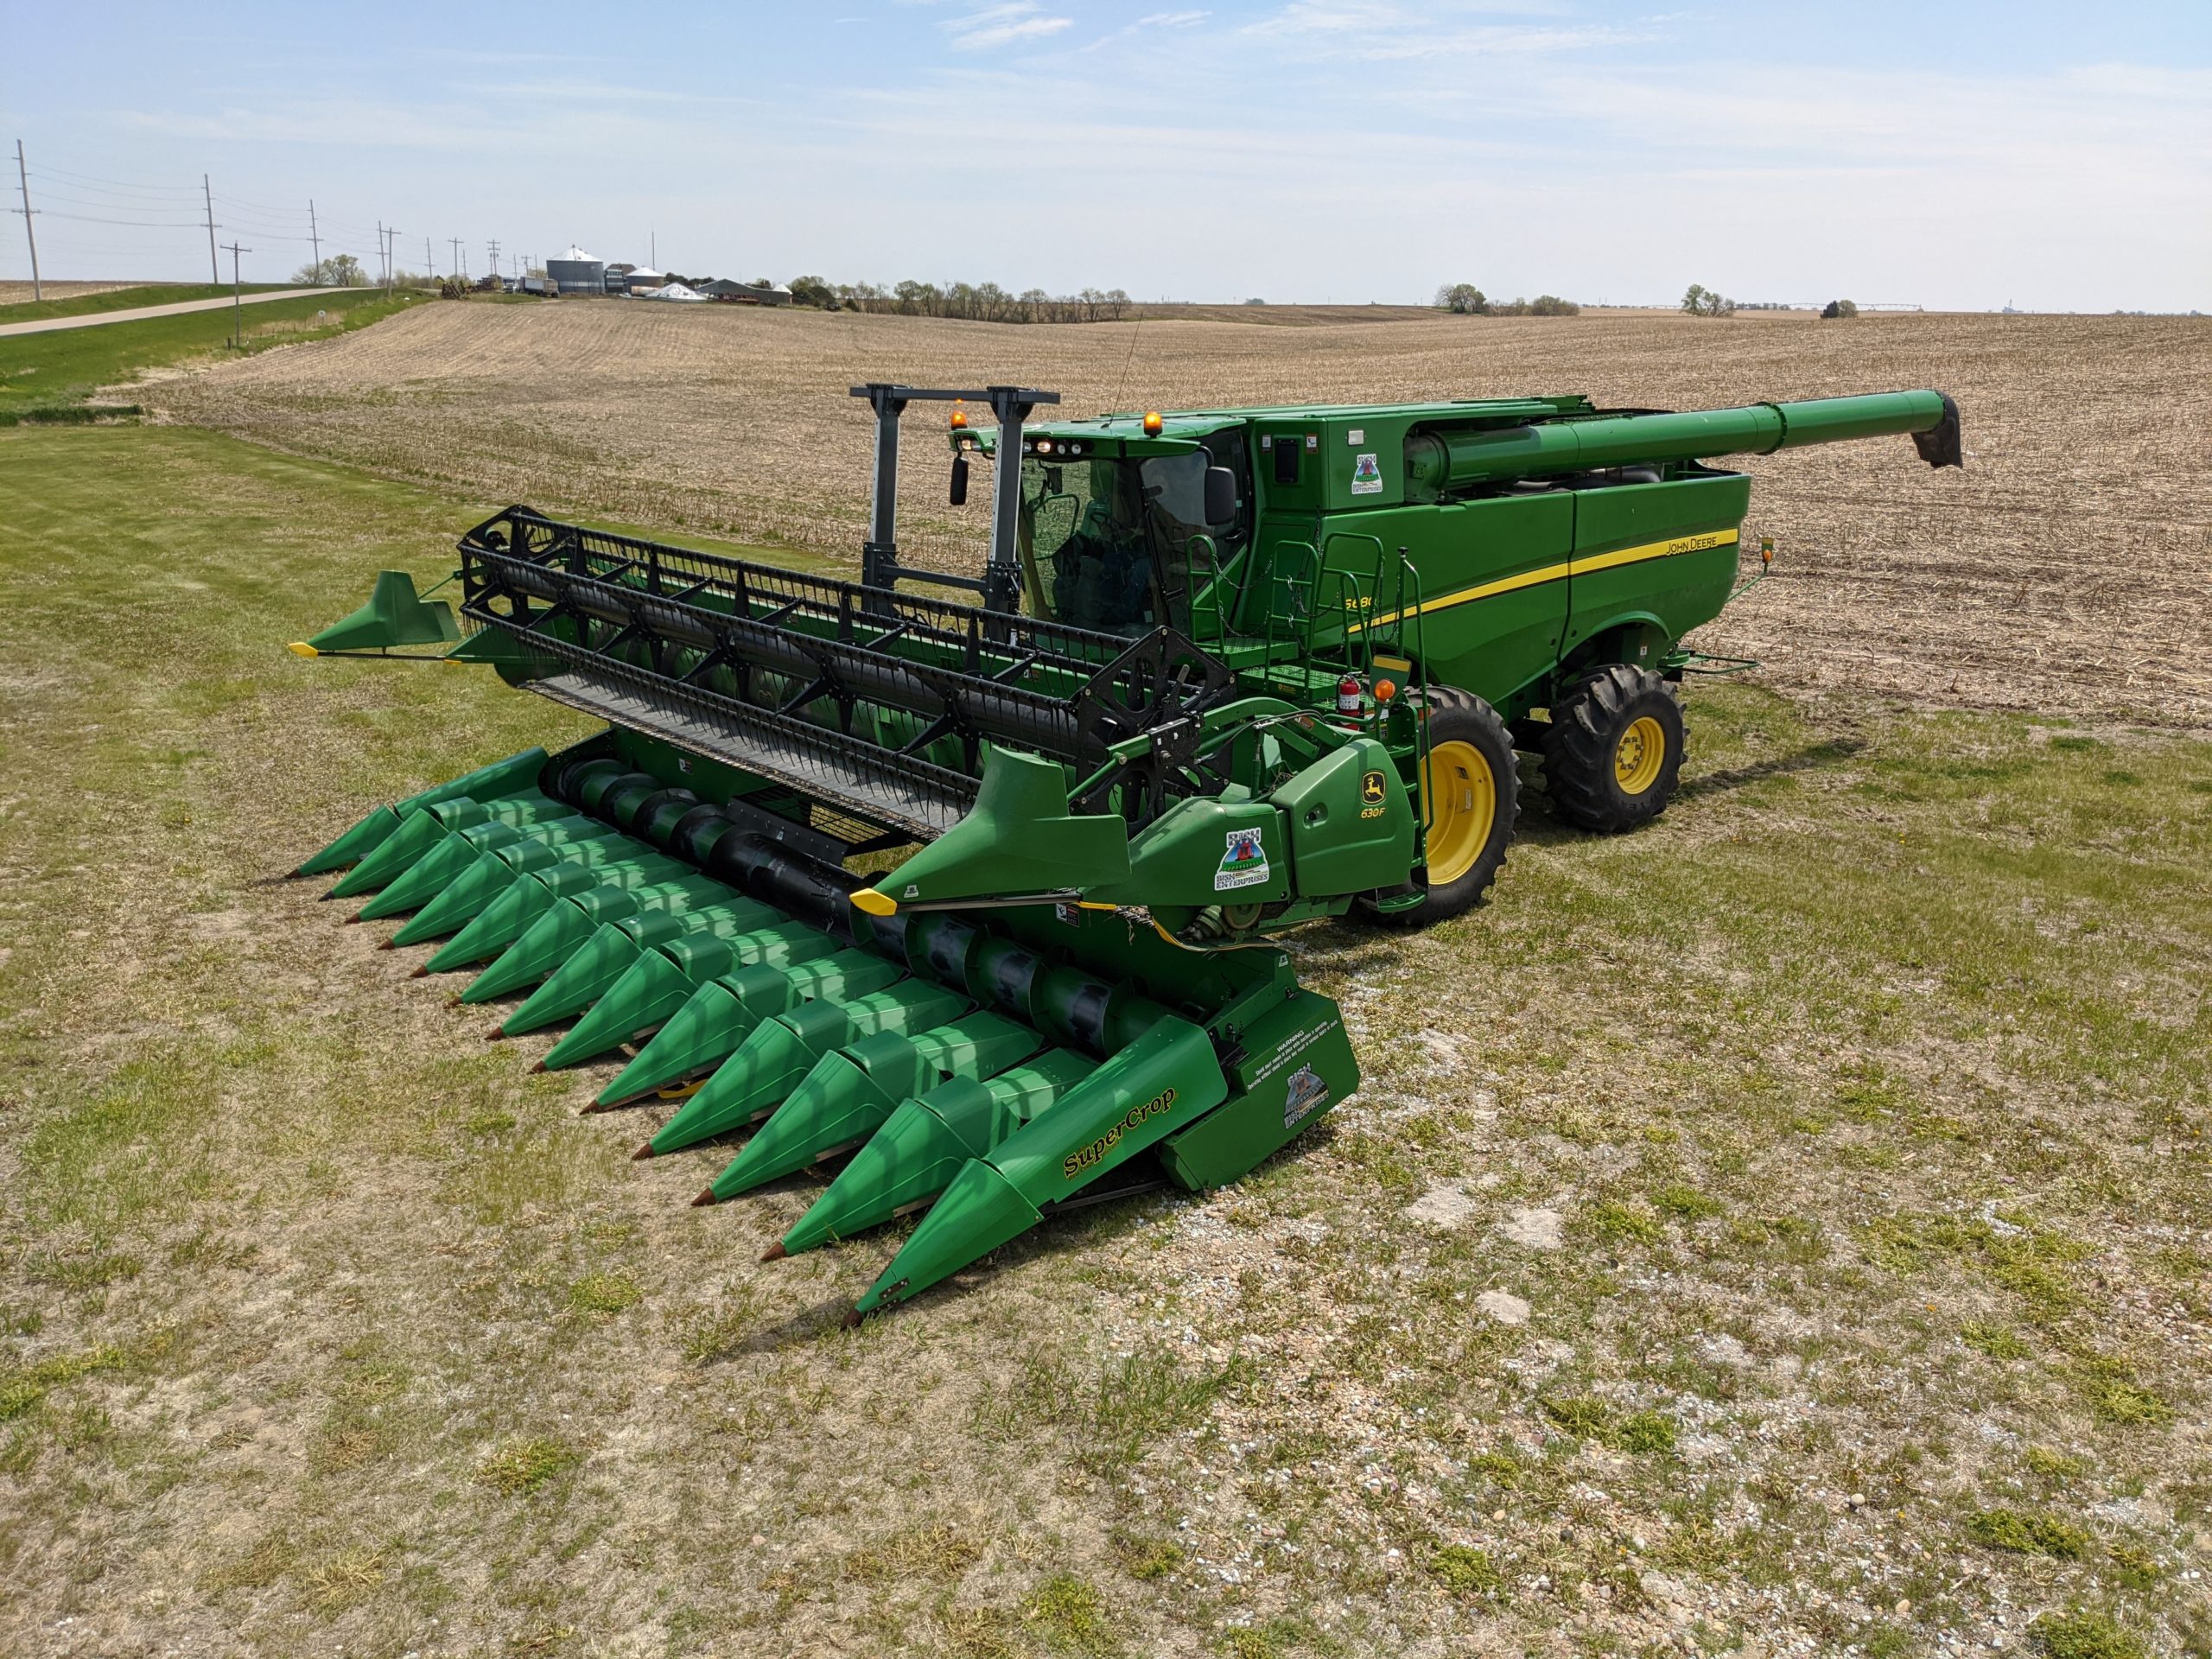 Double Cut Harvest System for Hemp – Available in American Market